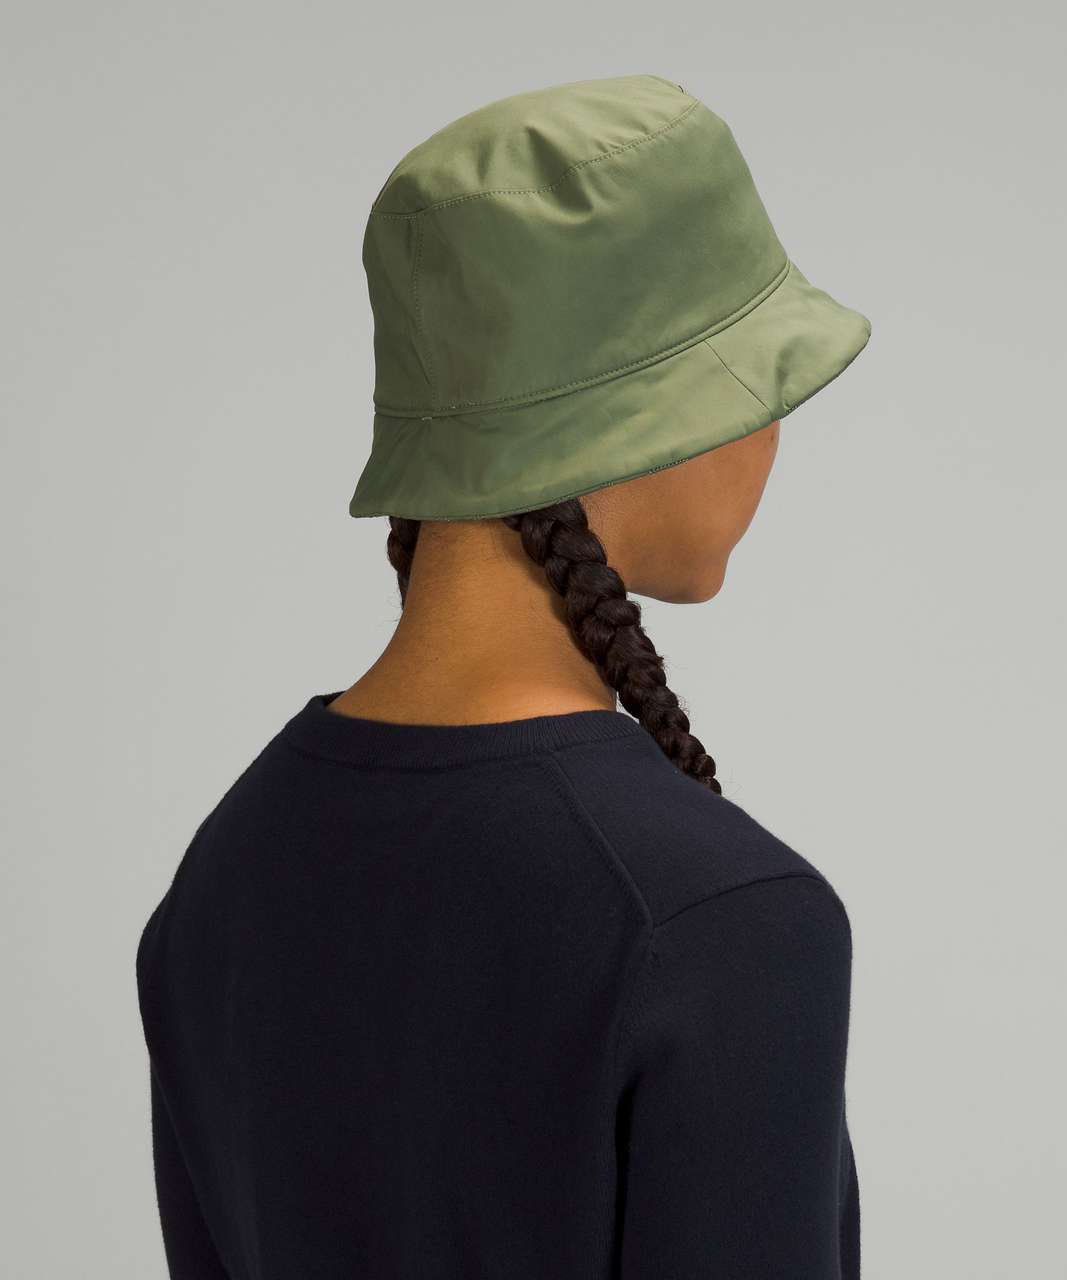 Lululemon Reversible Quilted Bucket Hat - Green Twill